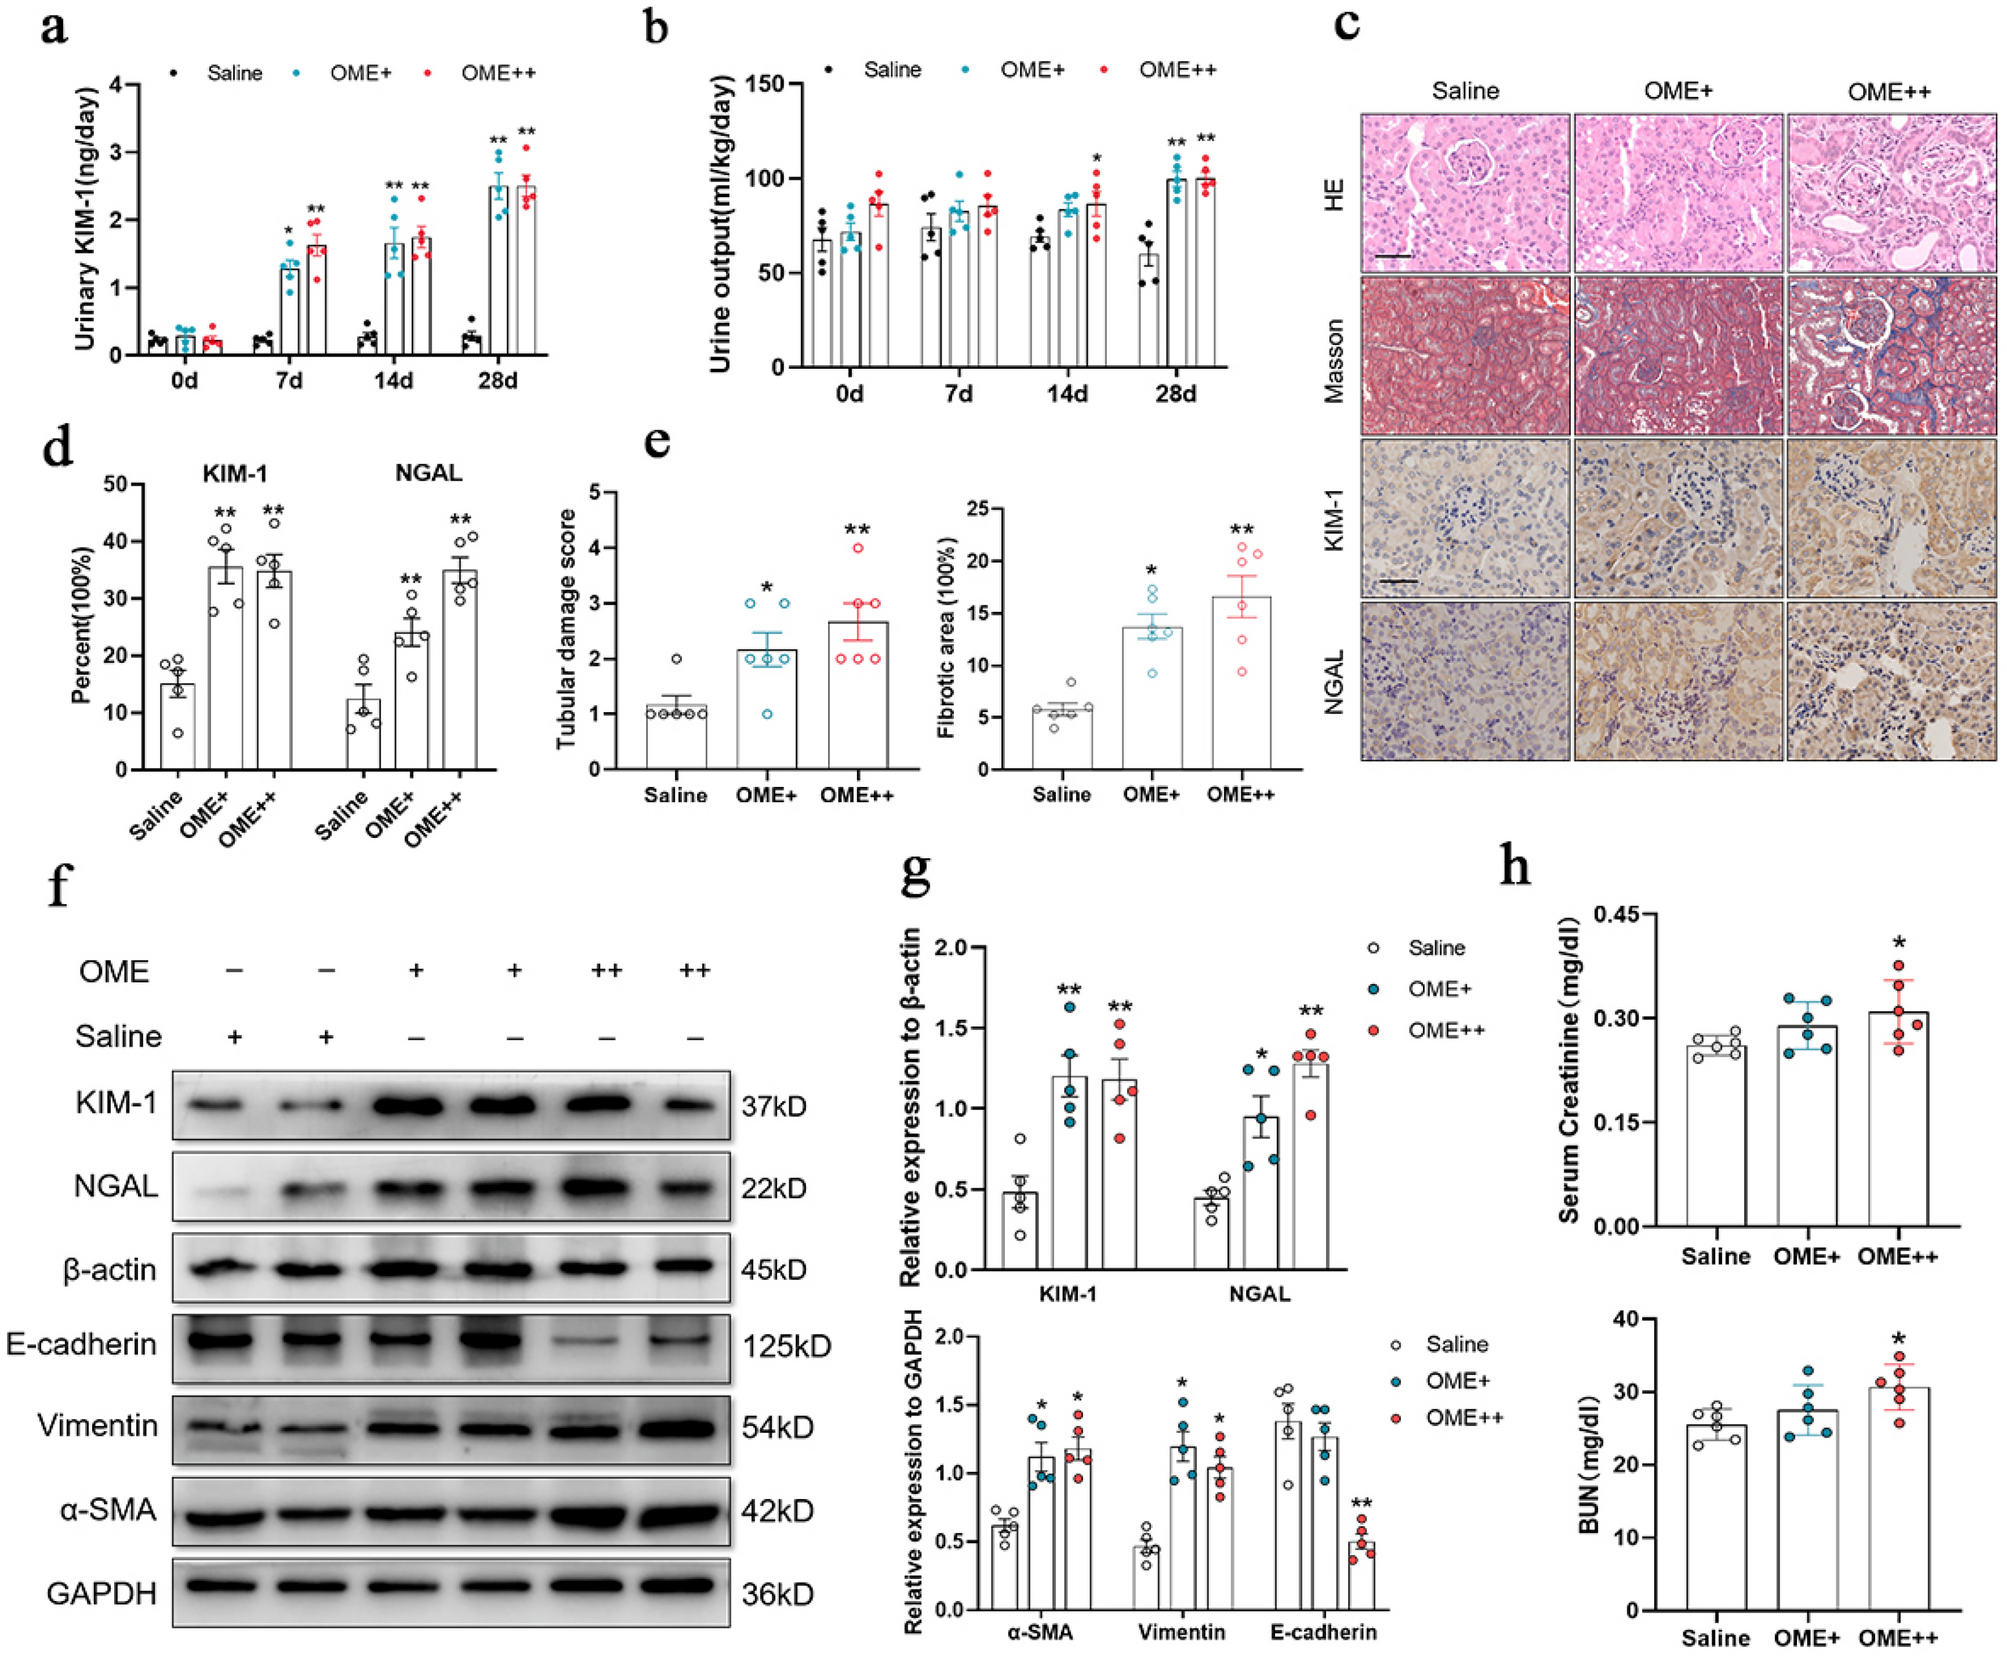 Blockade of aryl hydrocarbon receptor restricts omeprazole-induced chronic kidney disease